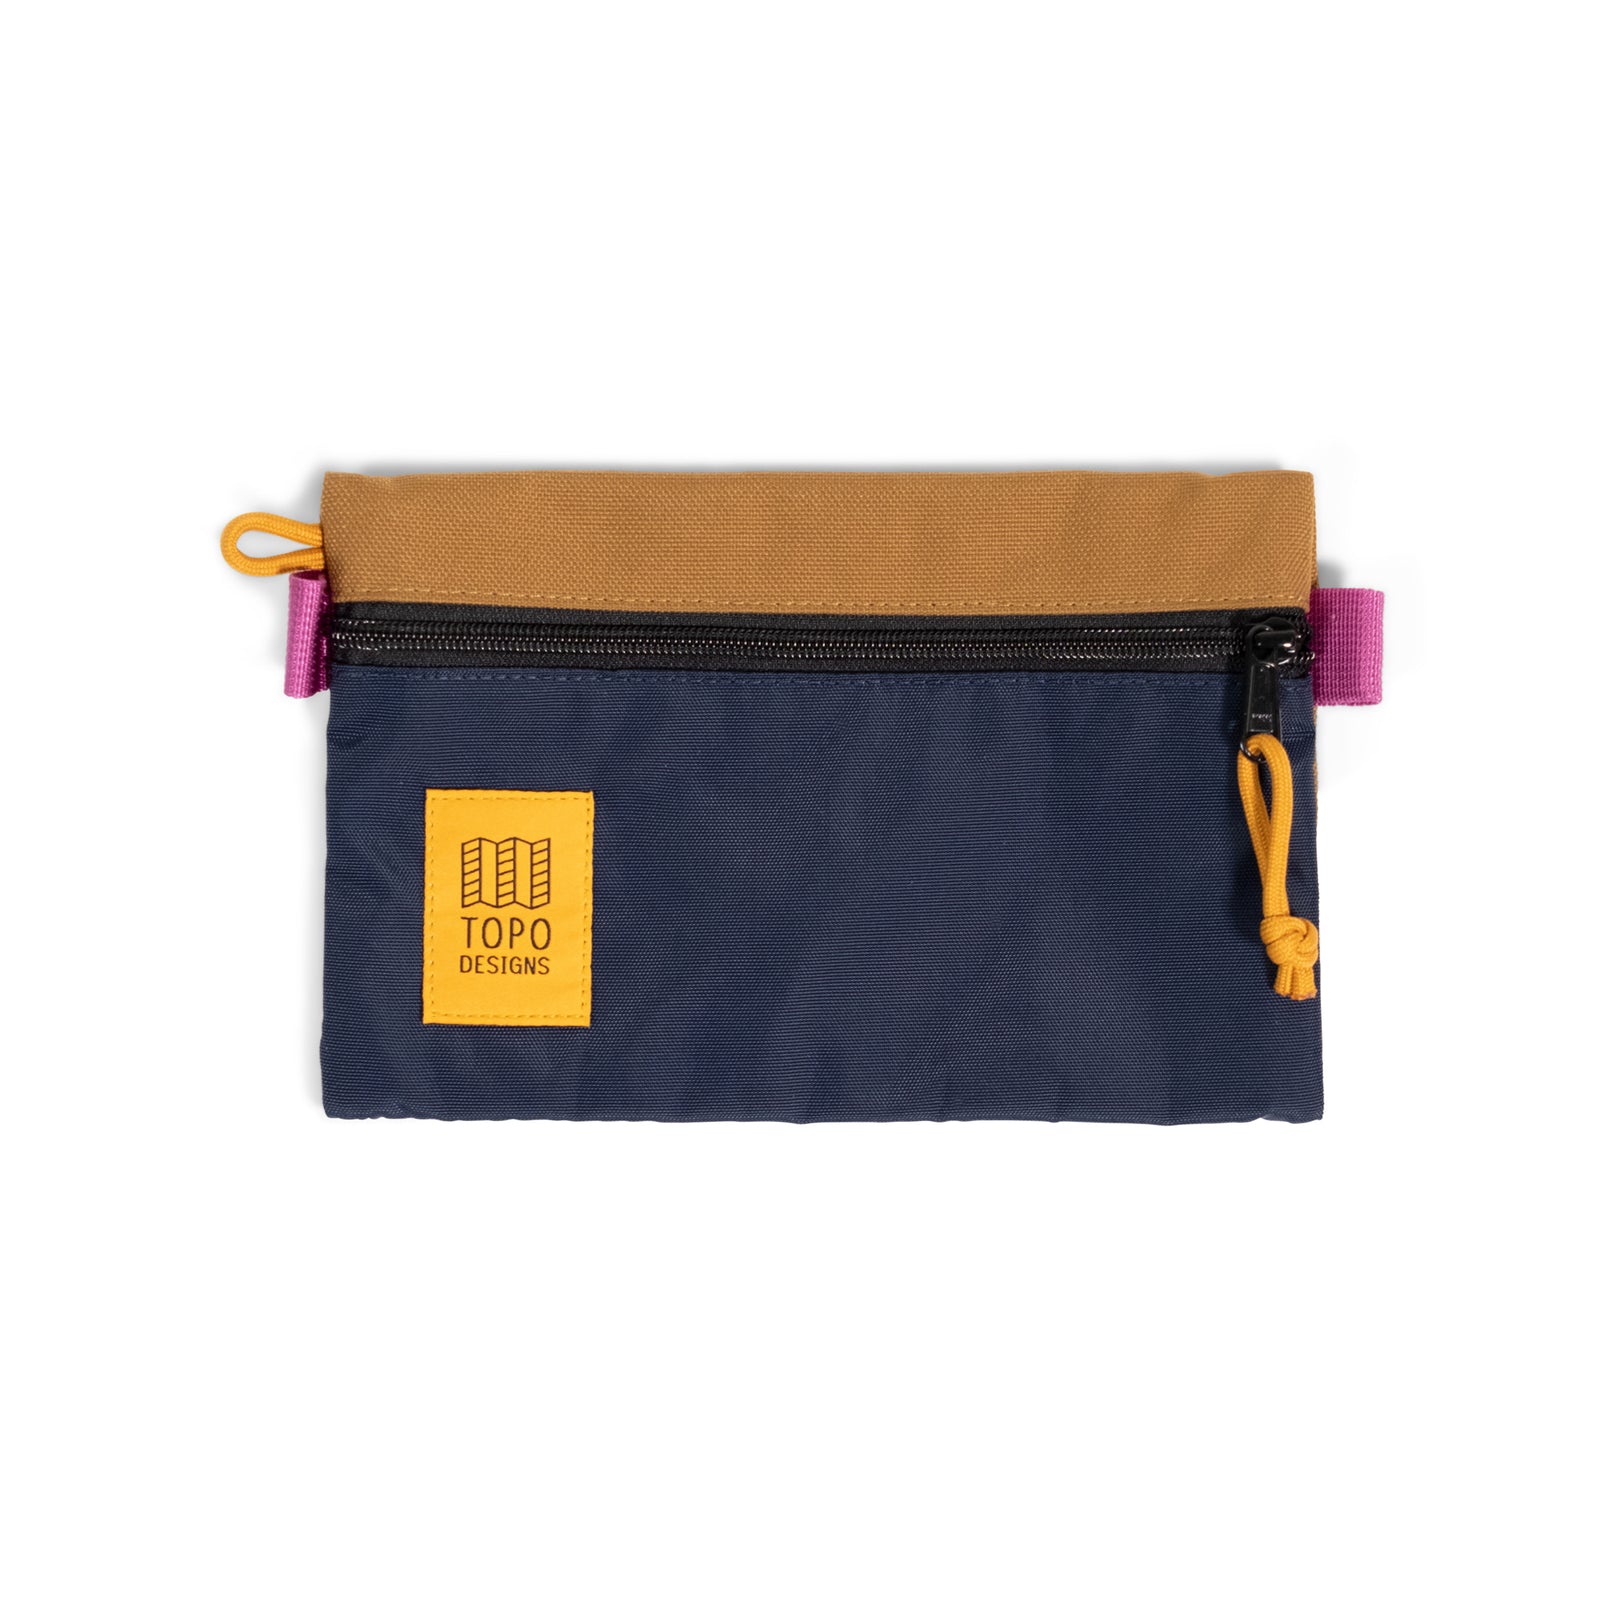 Front View of Topo Designs Accessory Bags in "Small" "Dark Khaki / Navy"